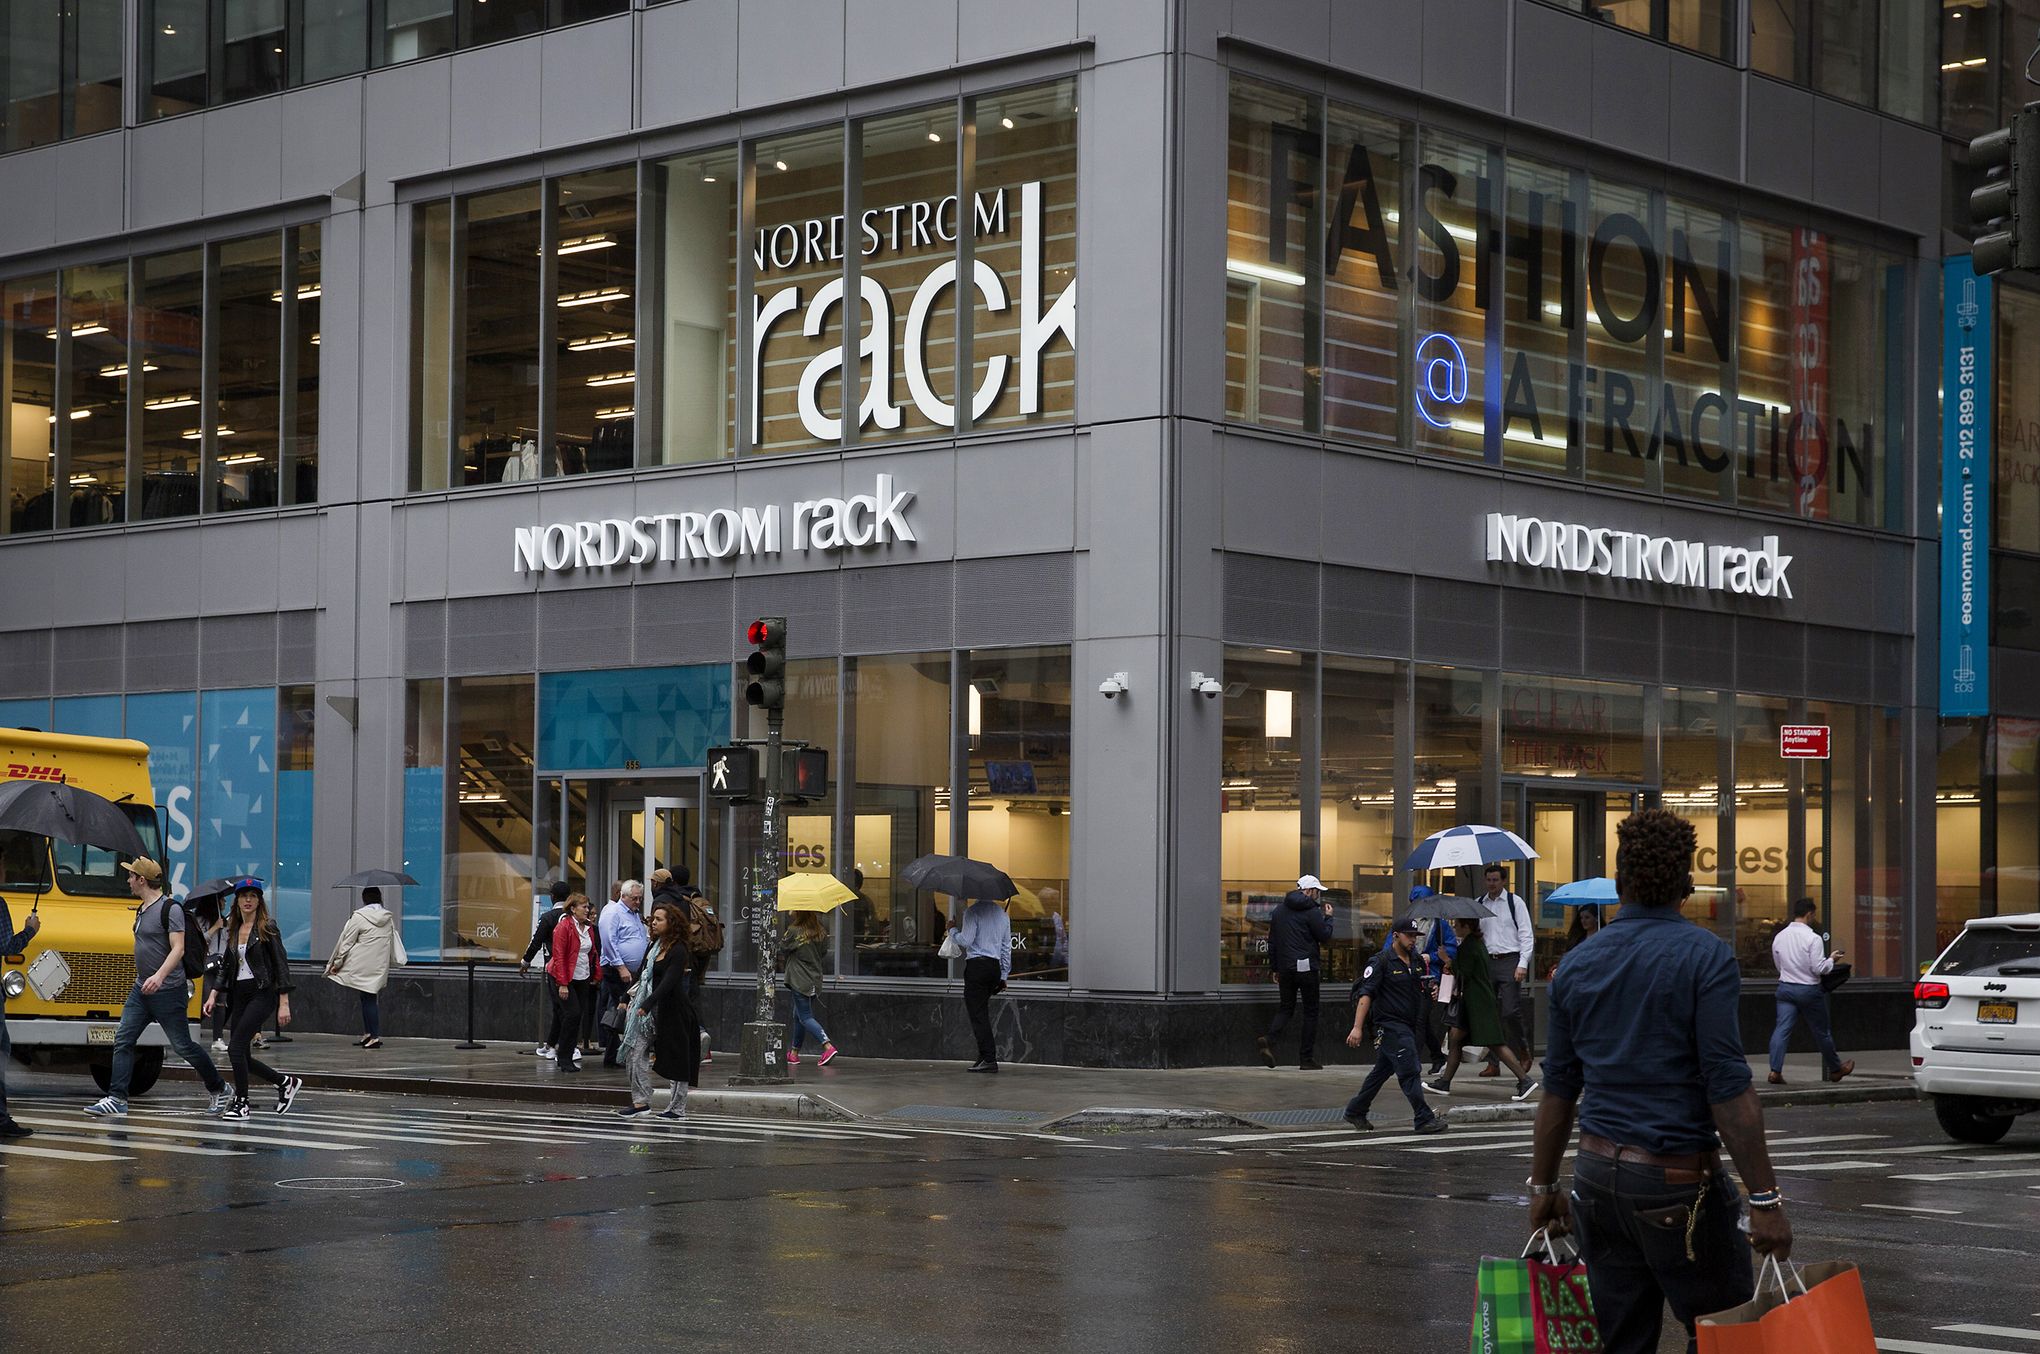 Nordstrom Rack Vs Saks Off 5th: Which Discount Store Is Better?